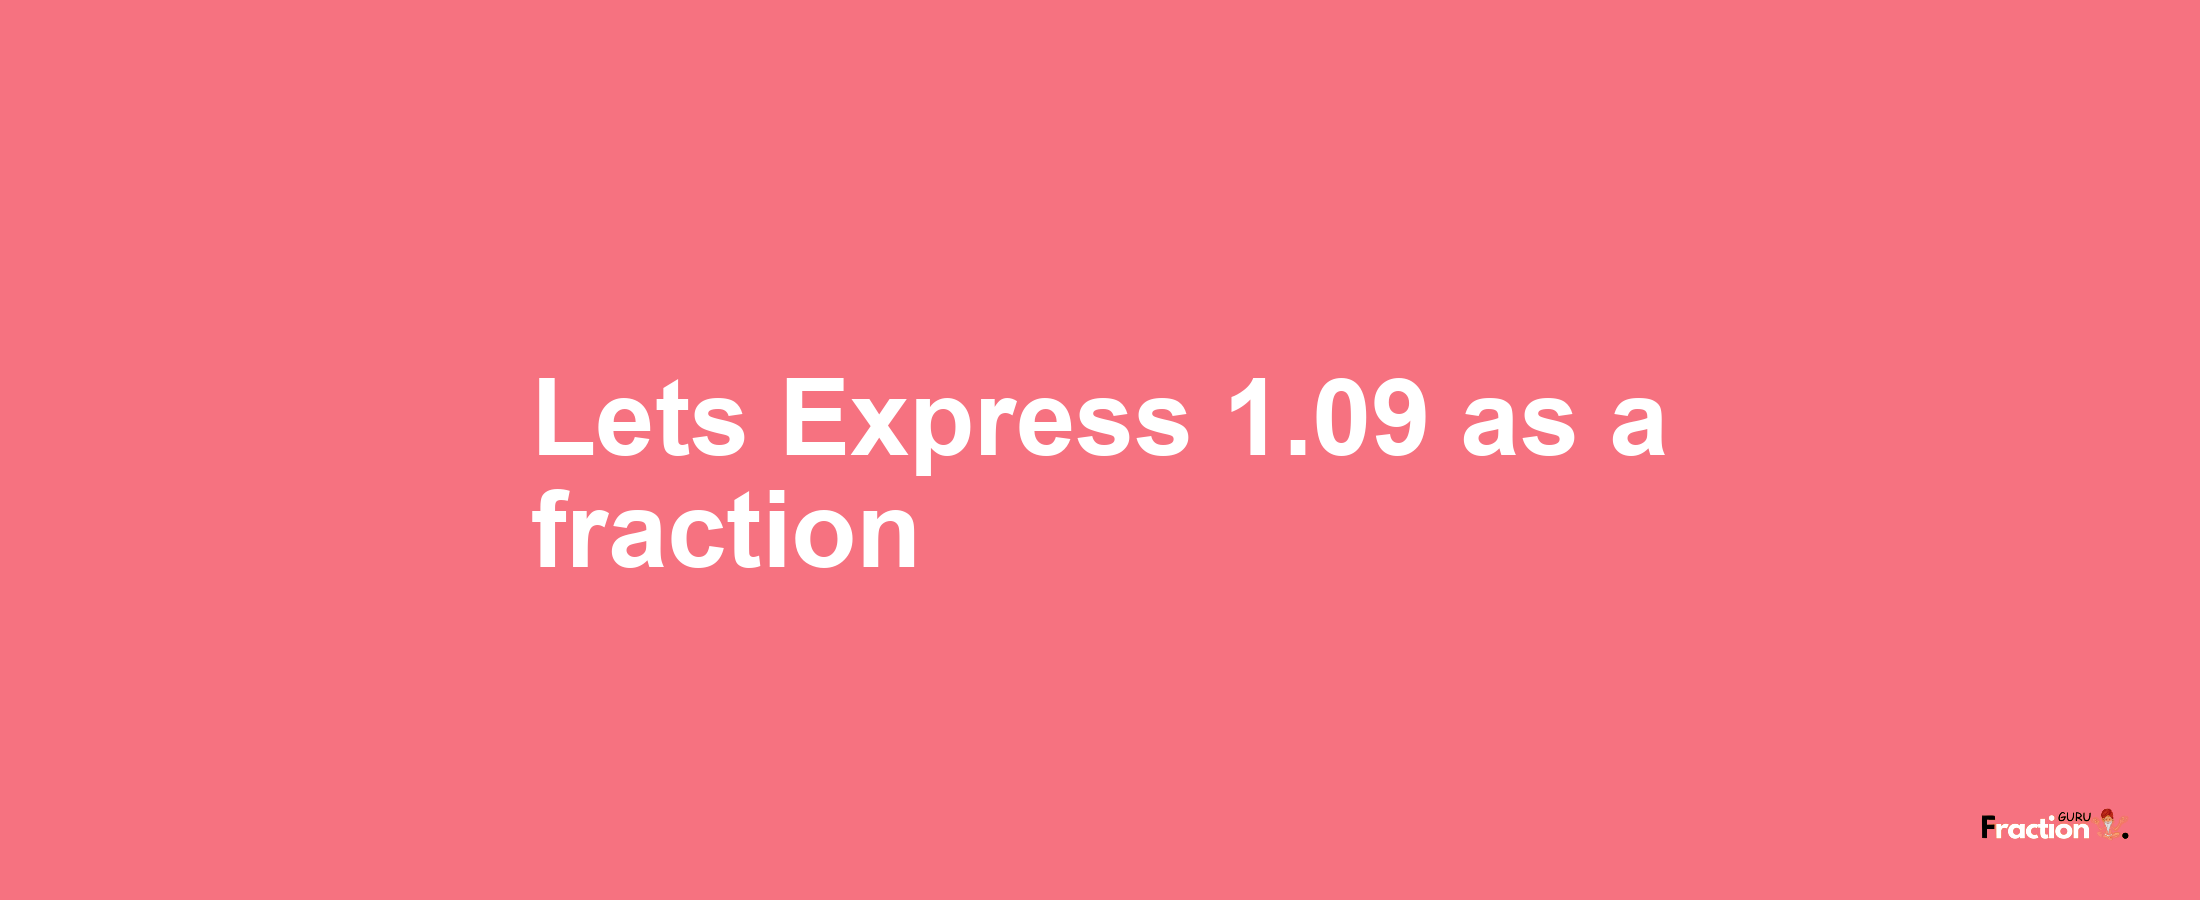 Lets Express 1.09 as afraction